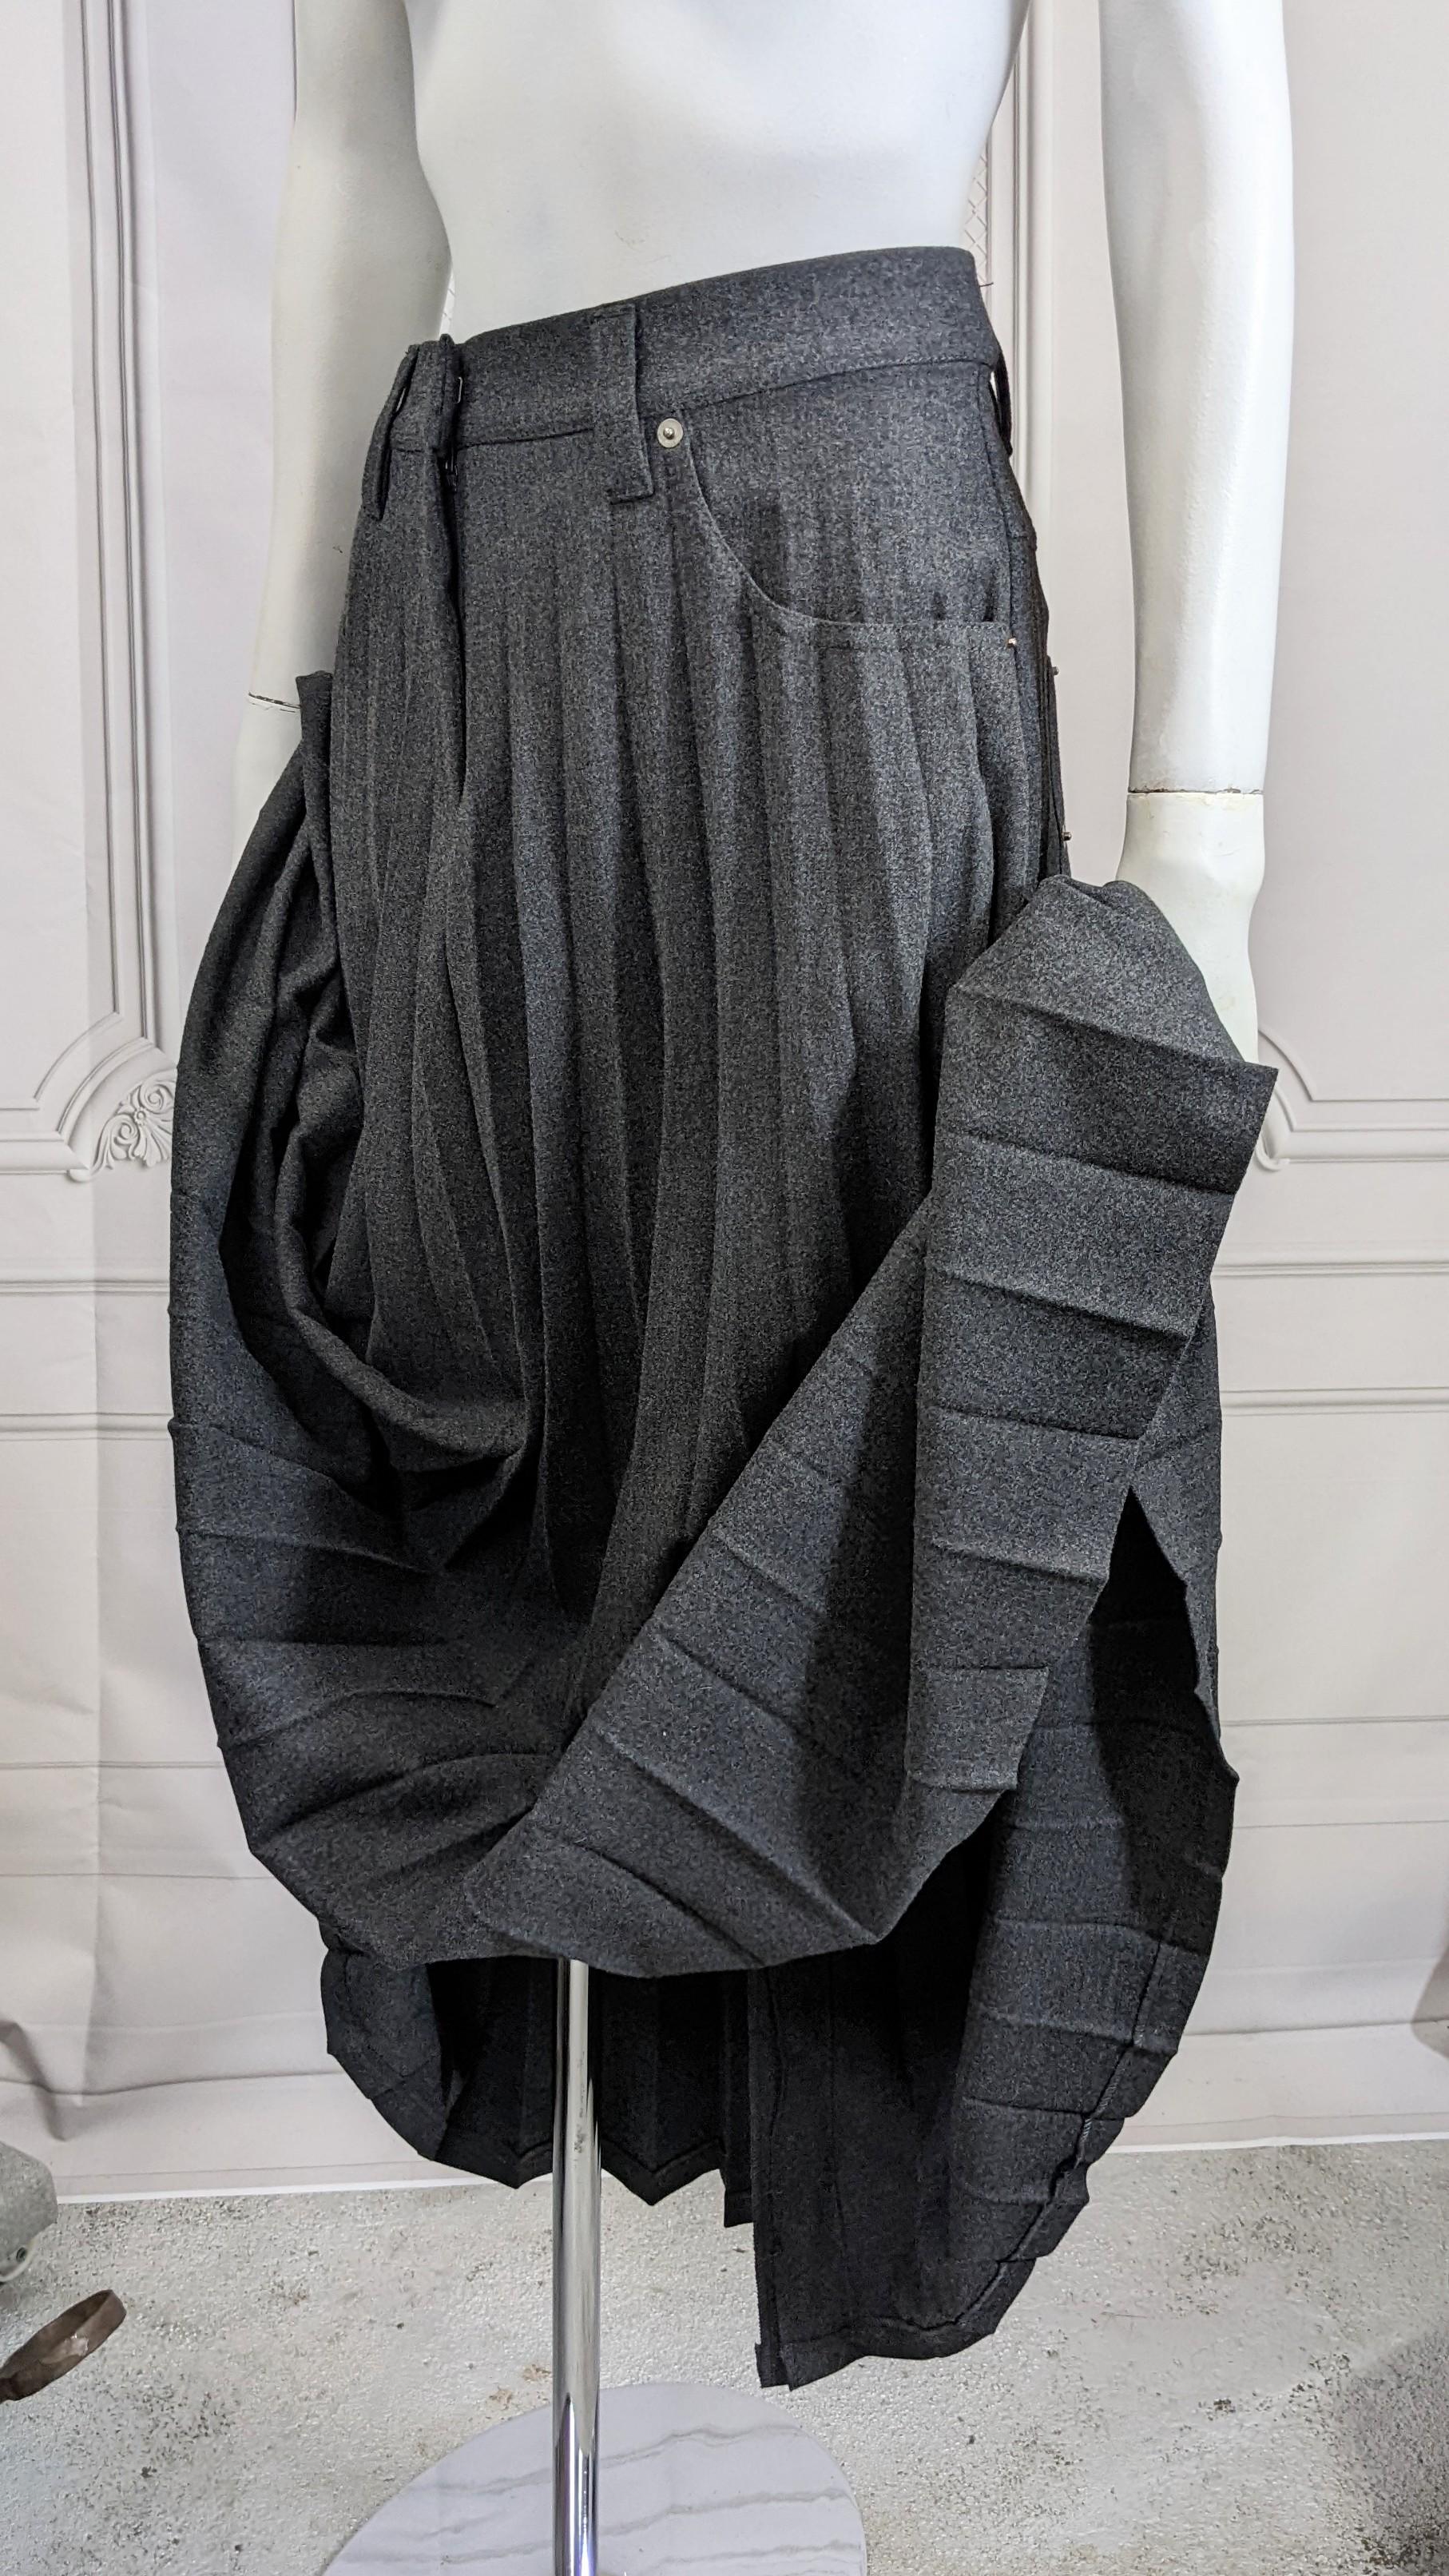 Cool and unusual Grey Flannel Pleated Sunburst Skirt styled like a pair of denim jeans with front and rear patch pockets and front zip. Thick flannel (slightly stretchy) rendered in a fully pleated full skirt by Gunex for Bruno Cuchinelli. Original